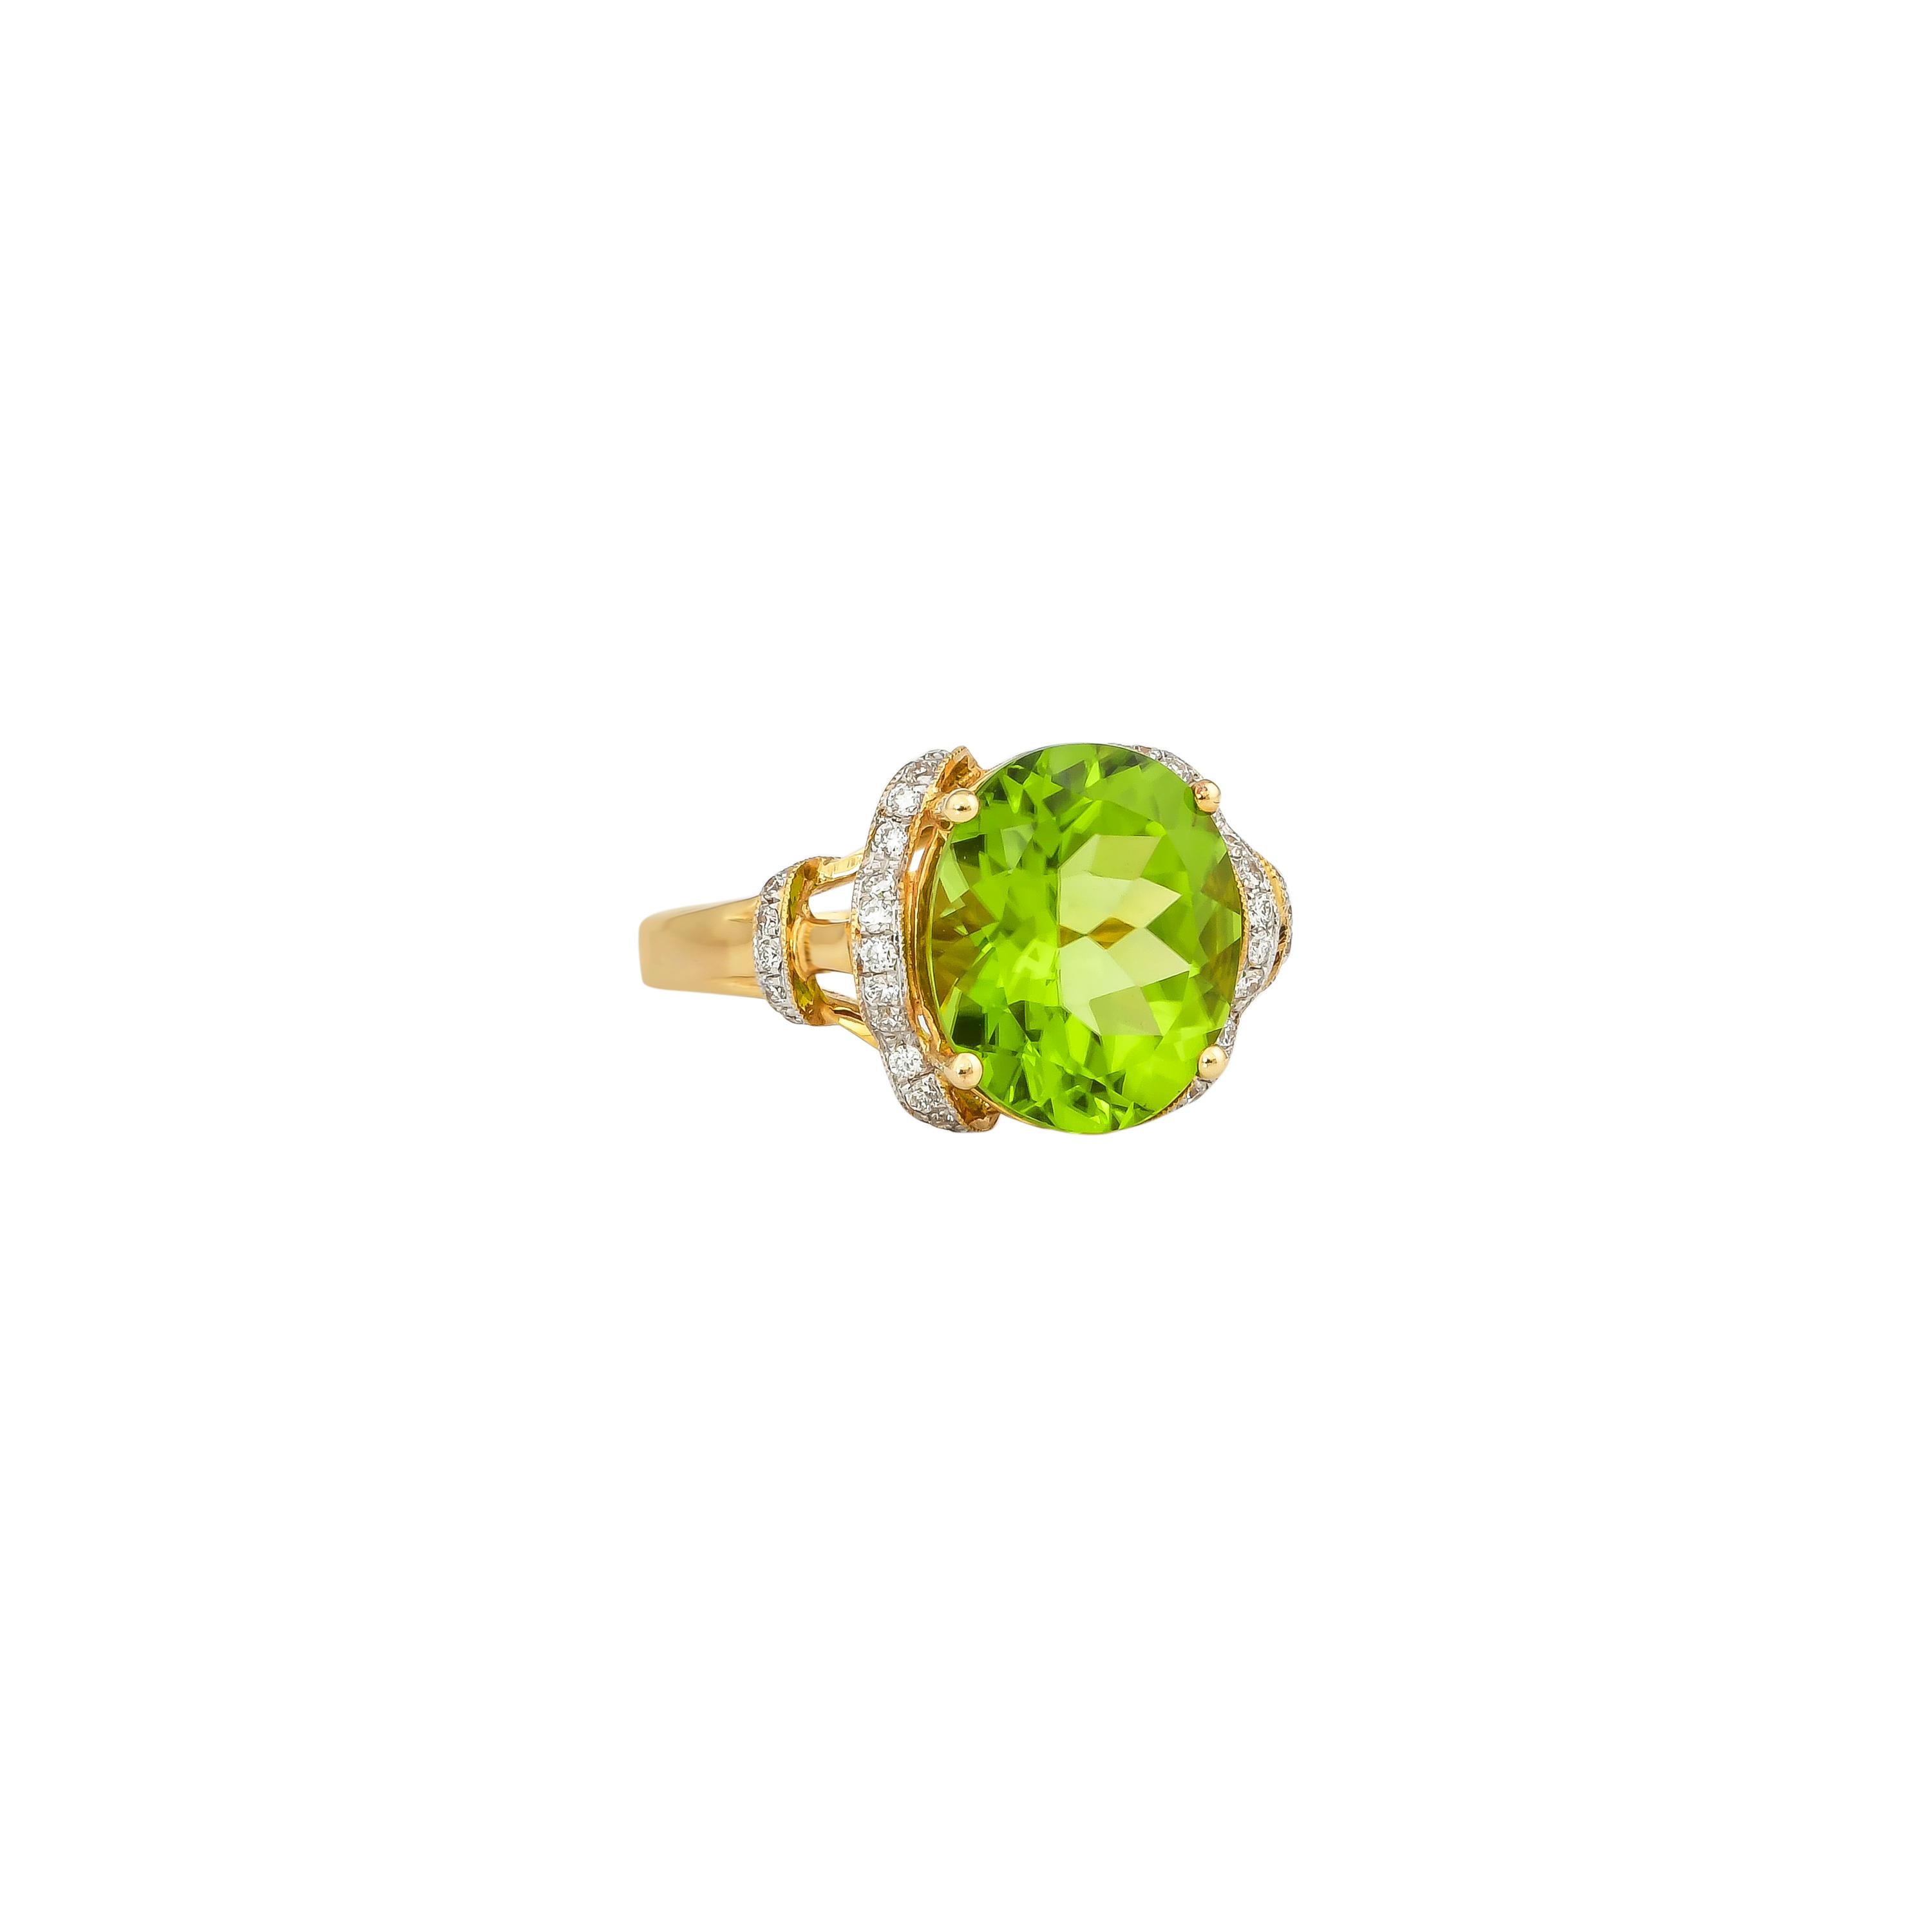 This collection features an array of pretty peridot rings! Accented with diamonds these rings are made in yellow gold and present a vibrant and fresh look. 

Classic peridot ring in 18K yellow gold with diamonds. 

Peridot: 4.63 carat oval